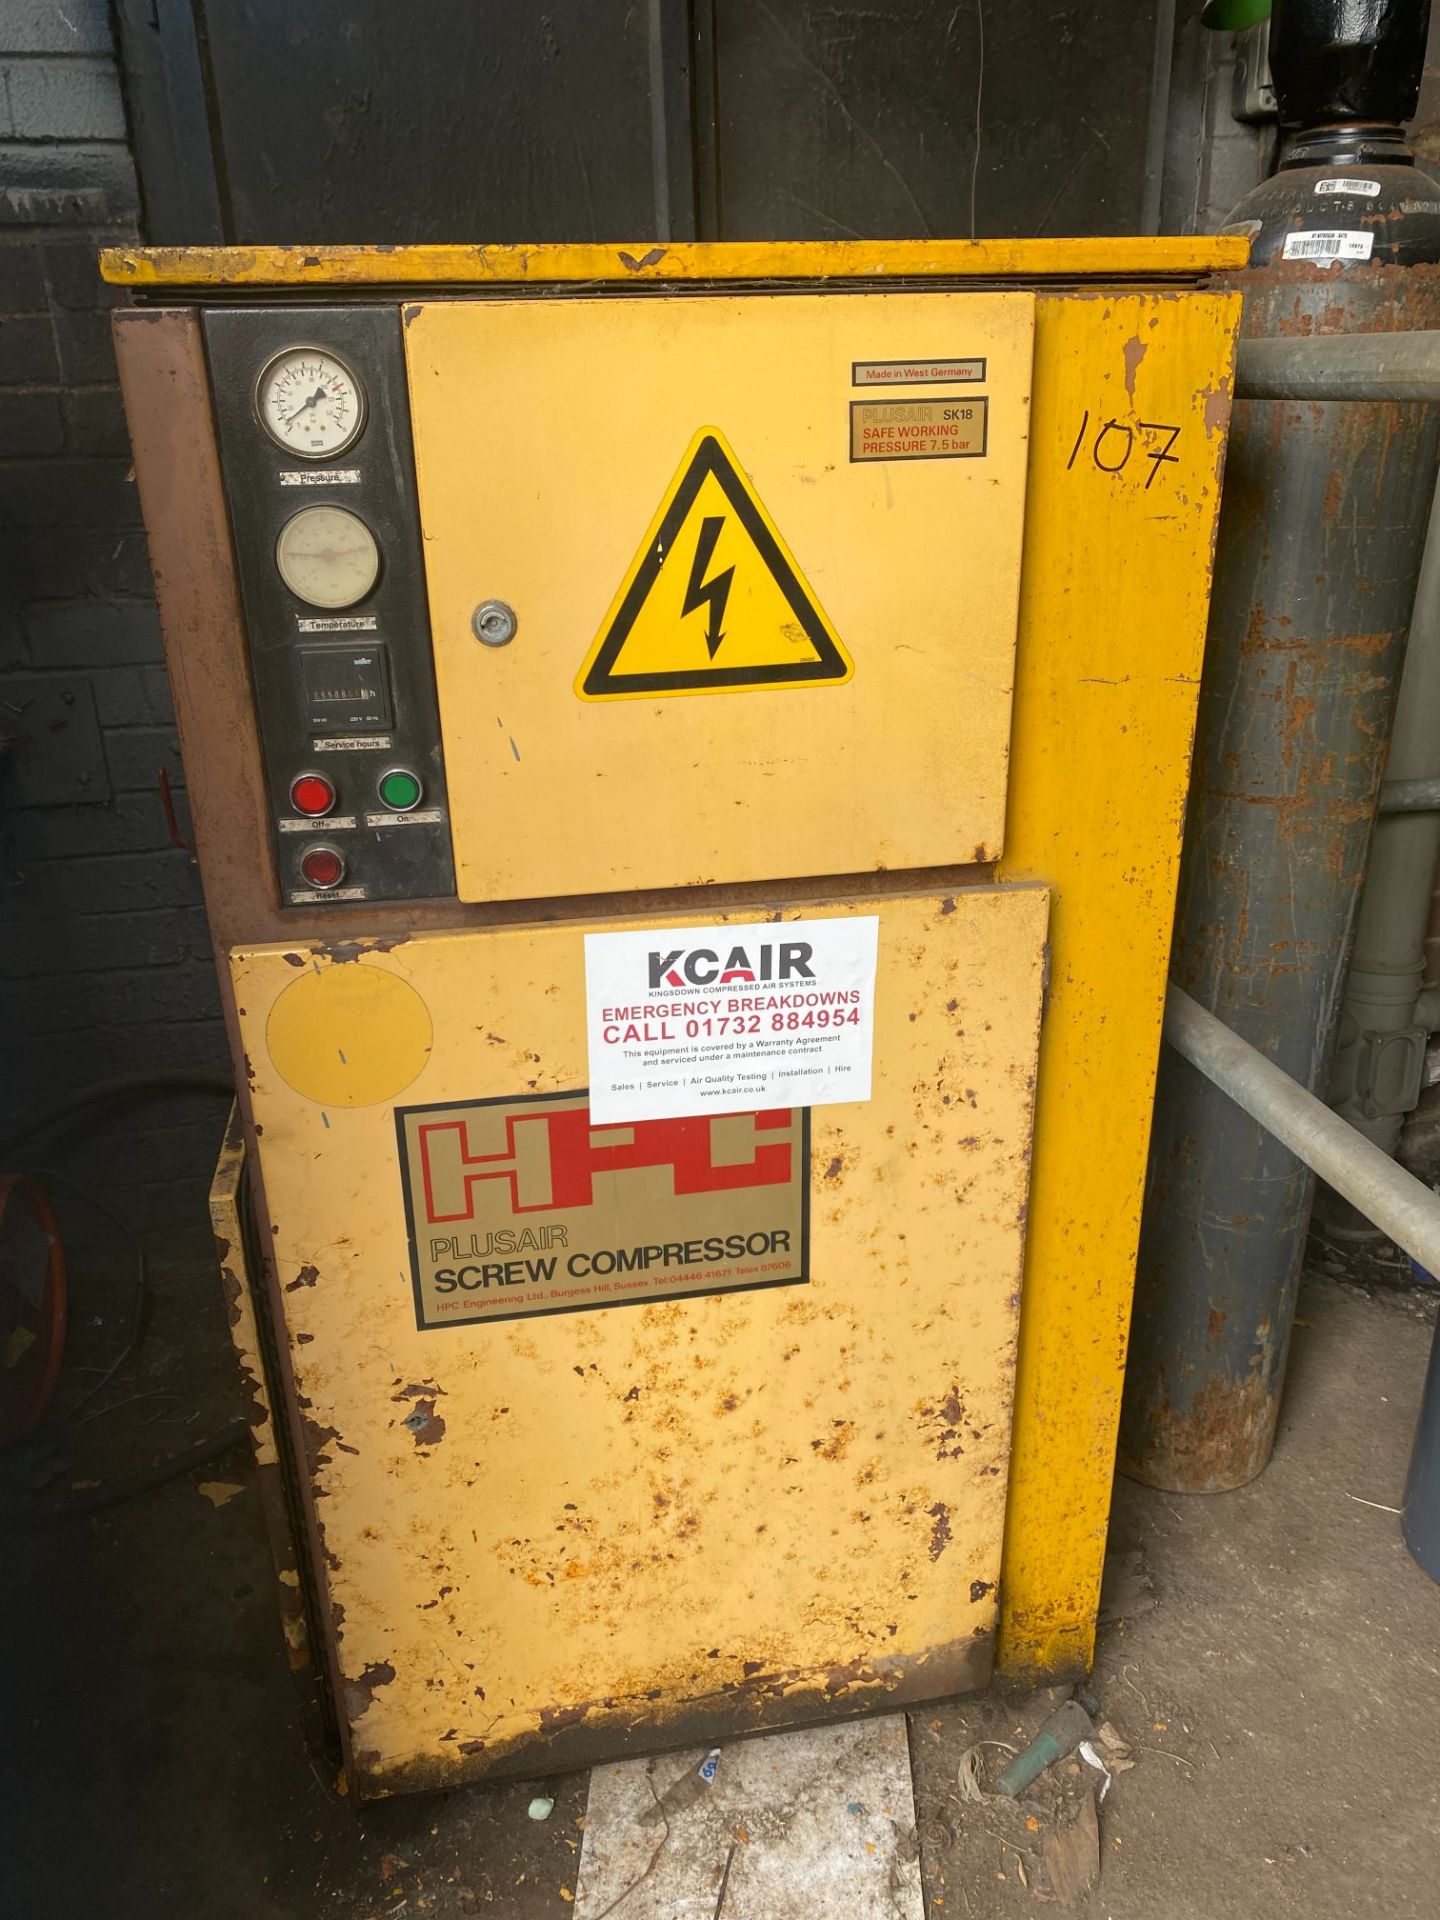 HPC PlusAir SK18 packaged rotary vane compressor, Serial No: N/A, Recorded hours 29,508